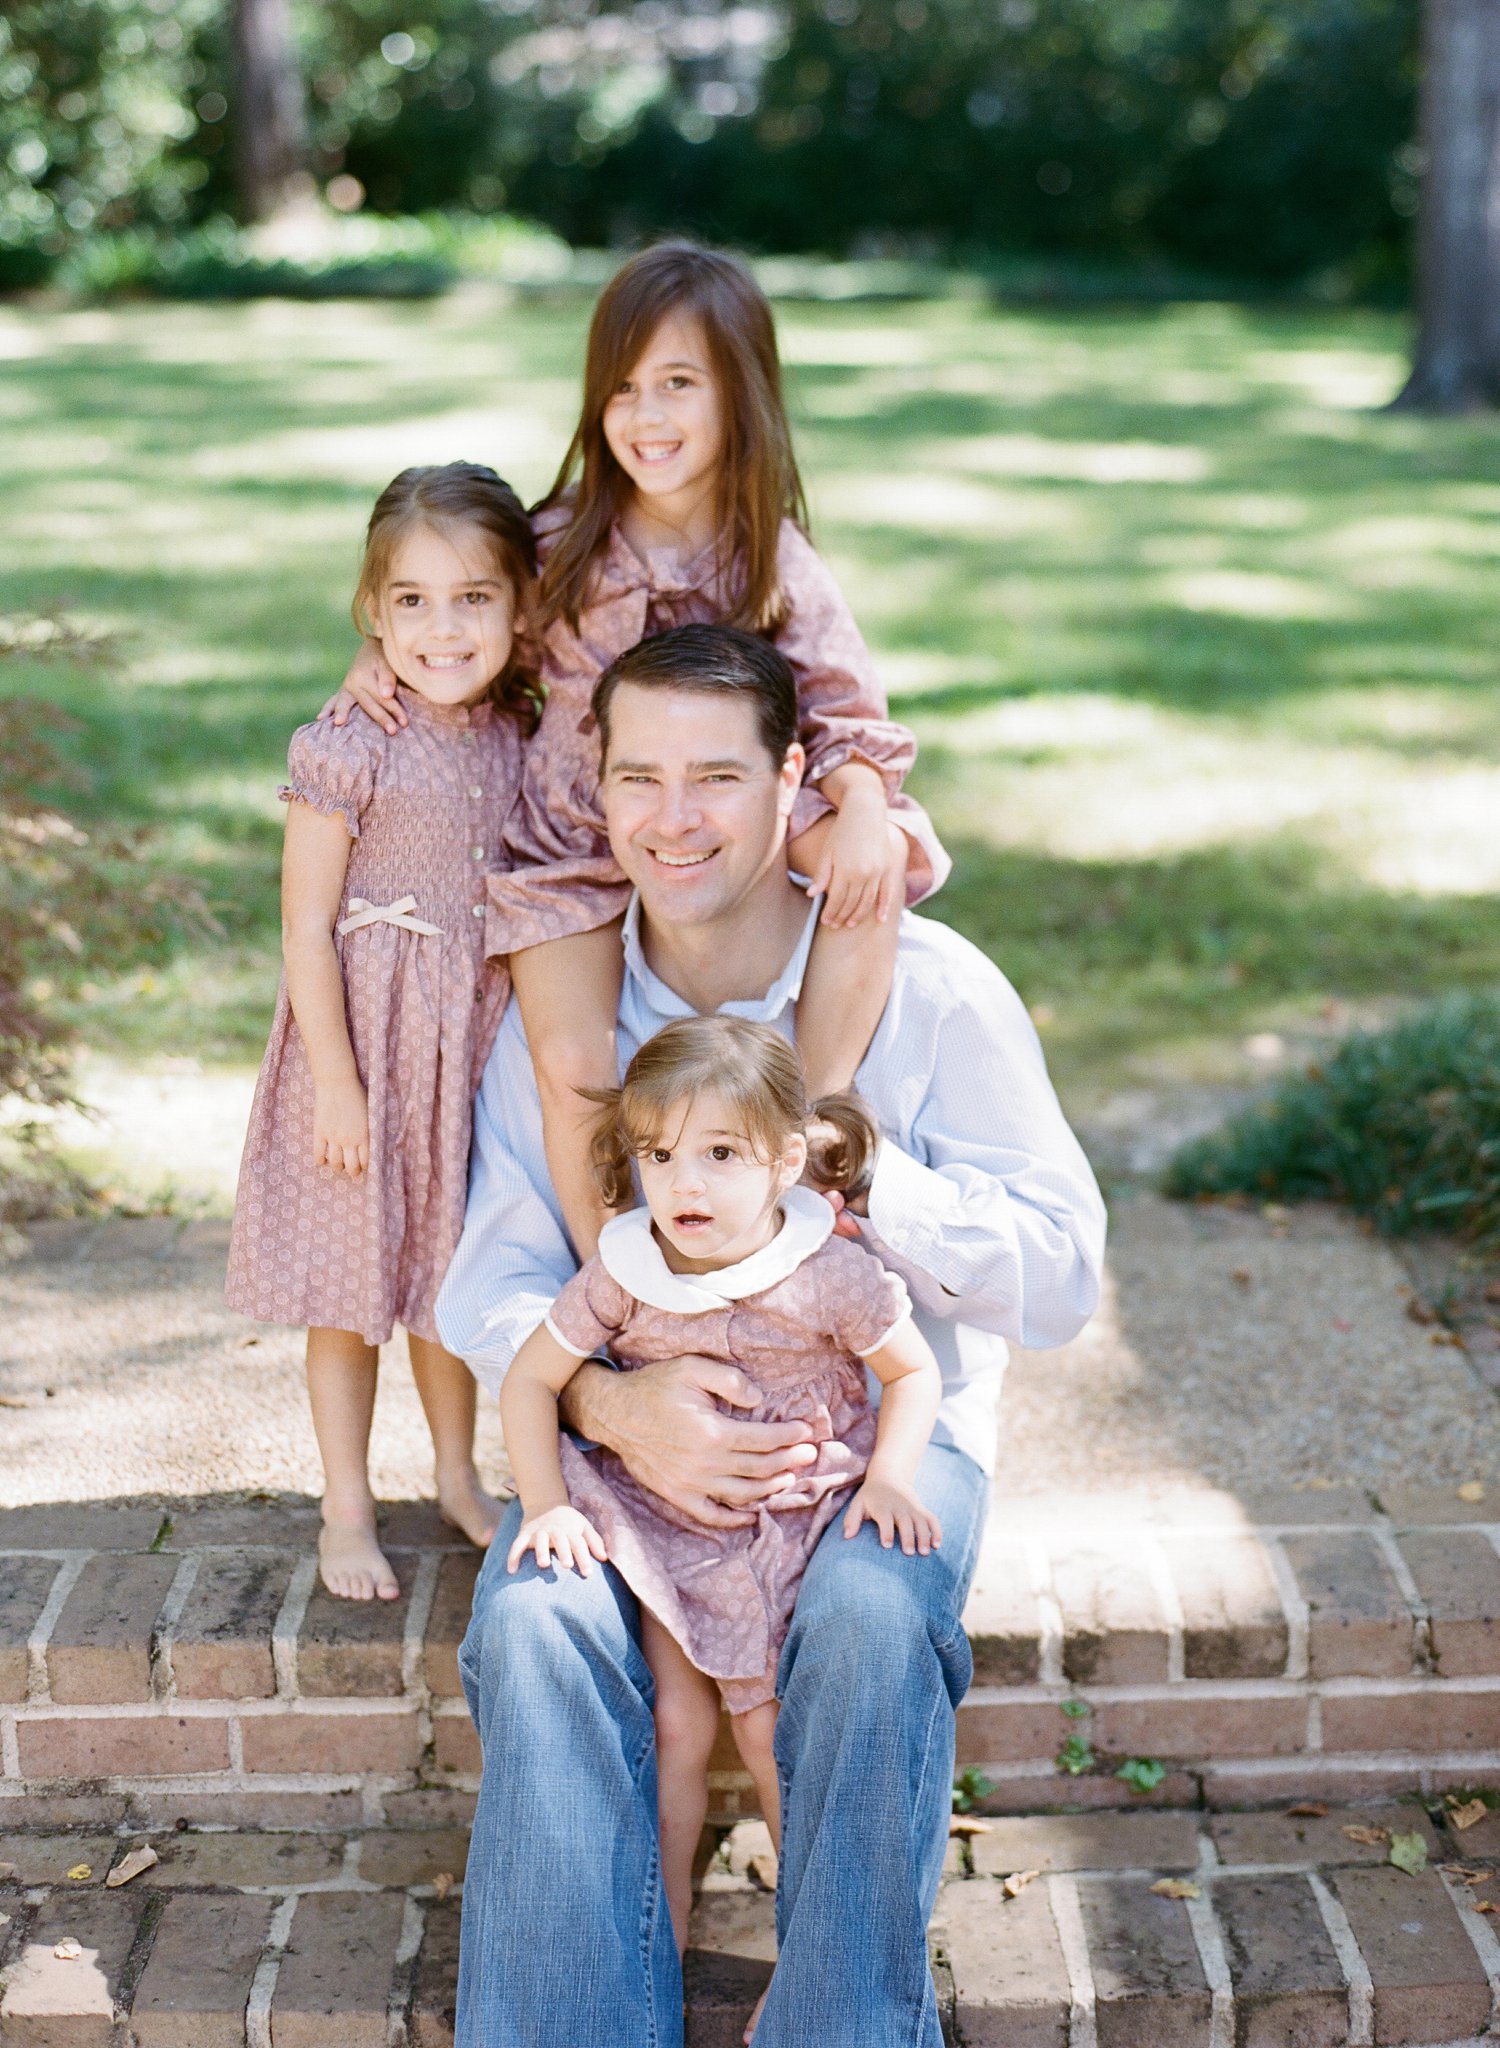 tallahassee family photographer shannon griffin photography_0047.jpg